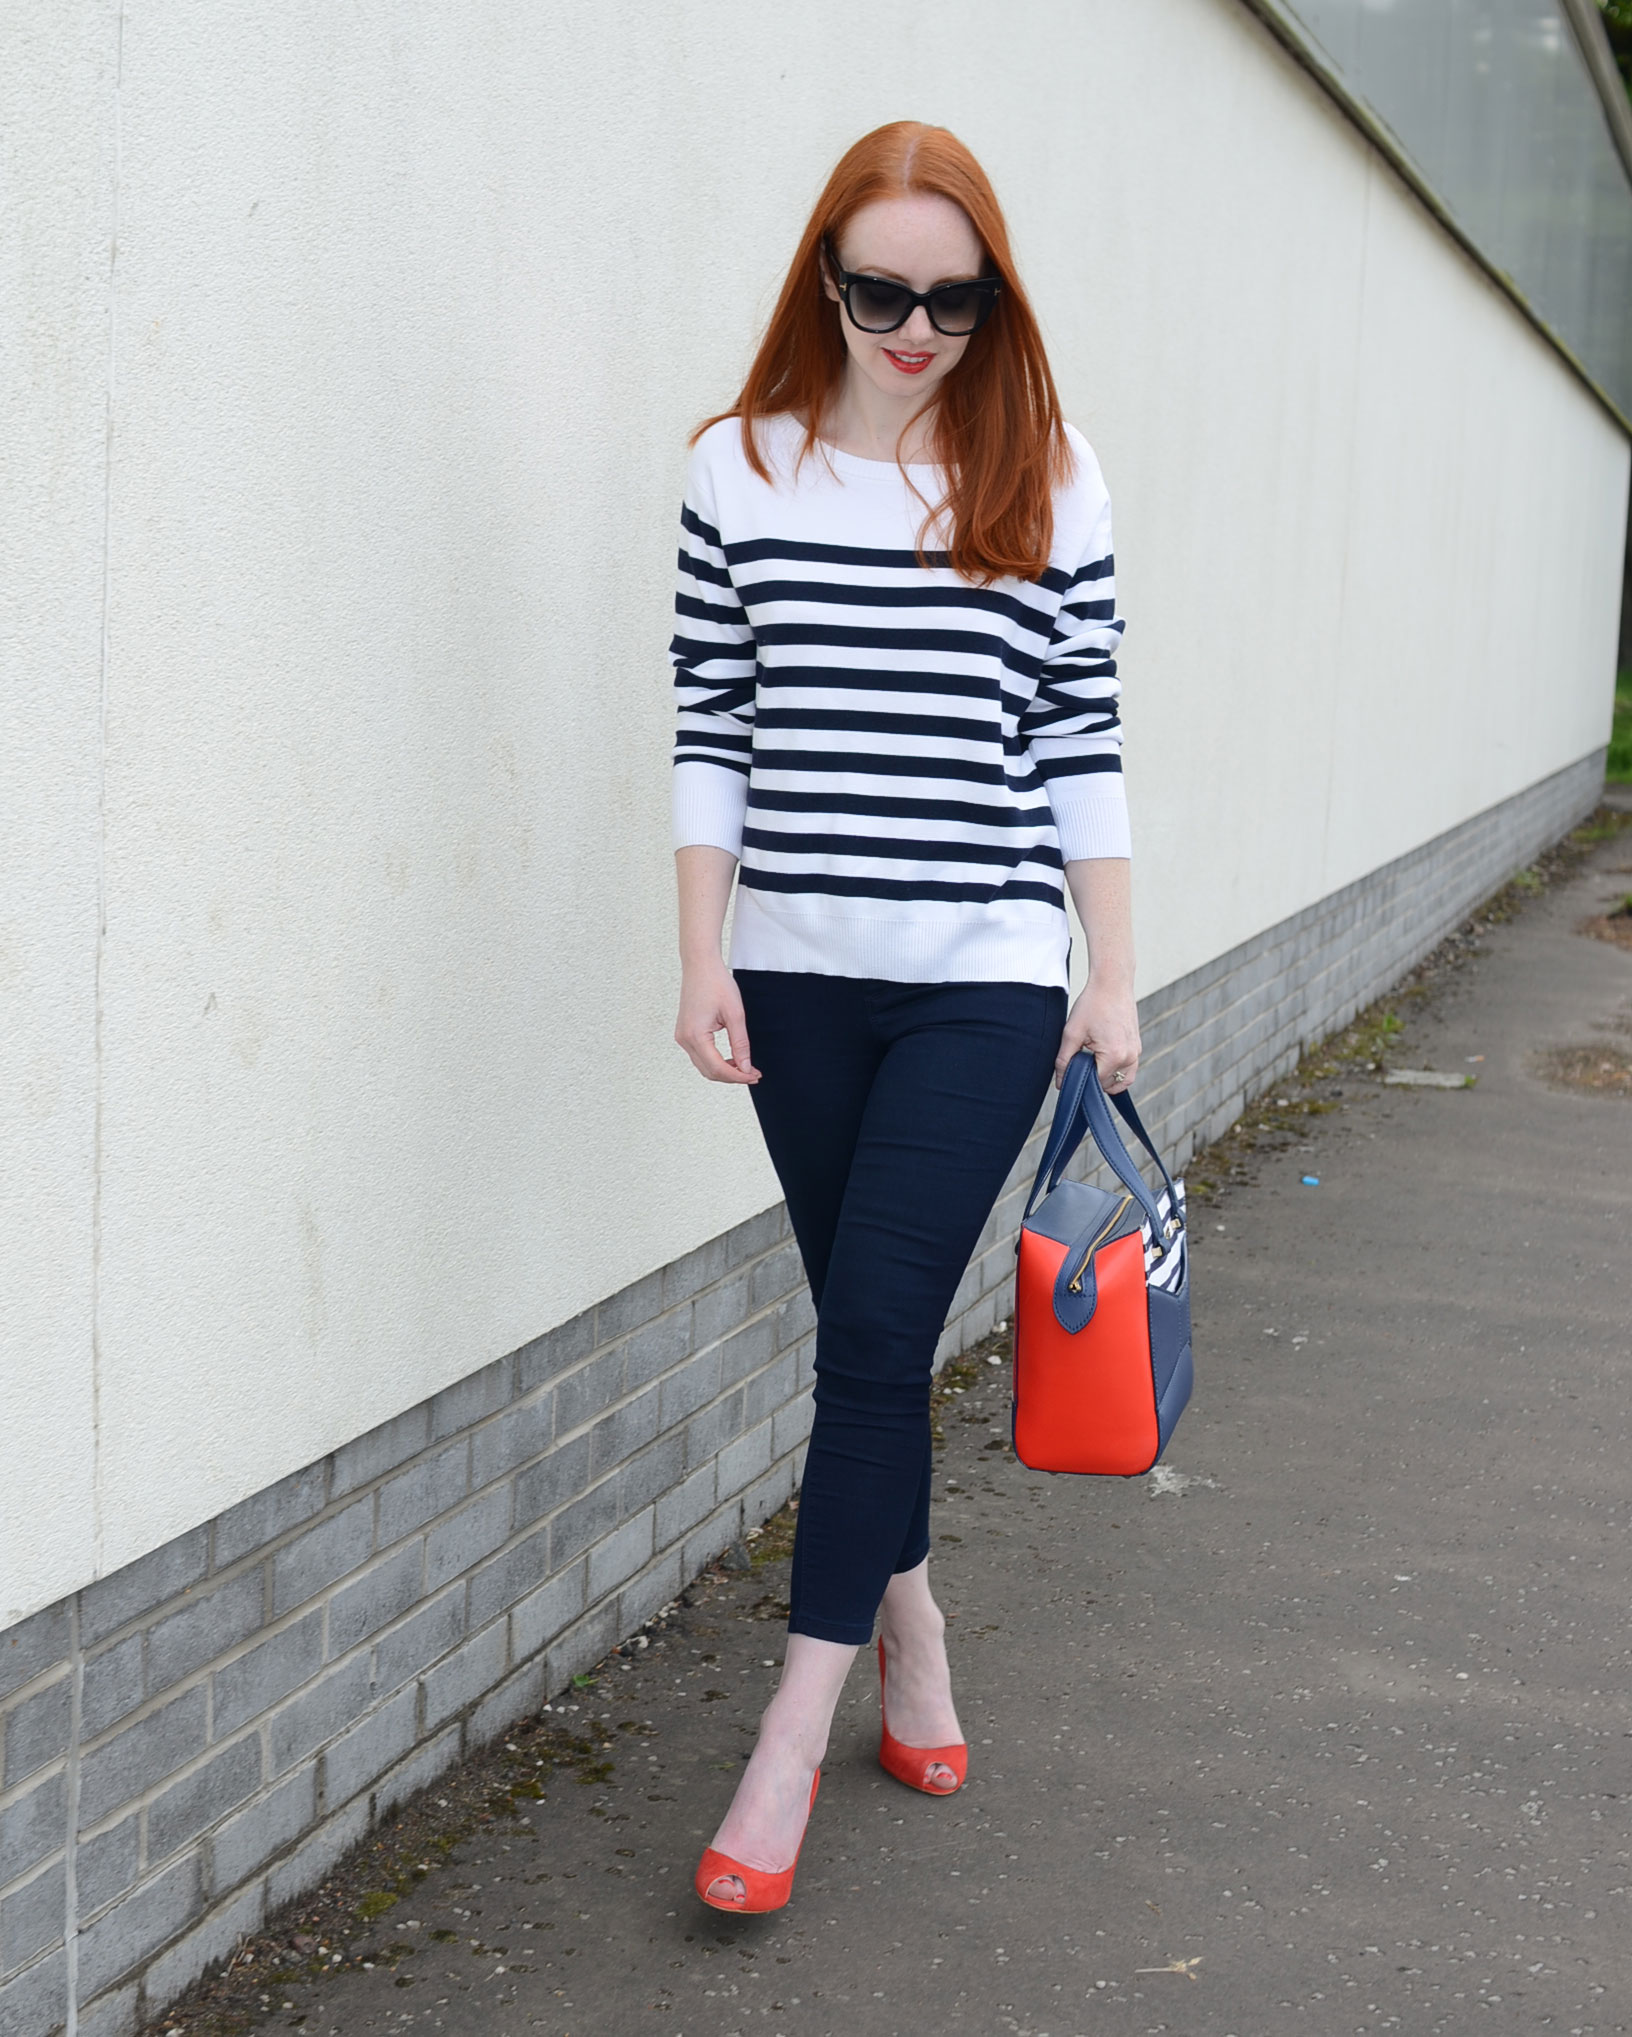 smart/casual look featuring strip top and red high heels